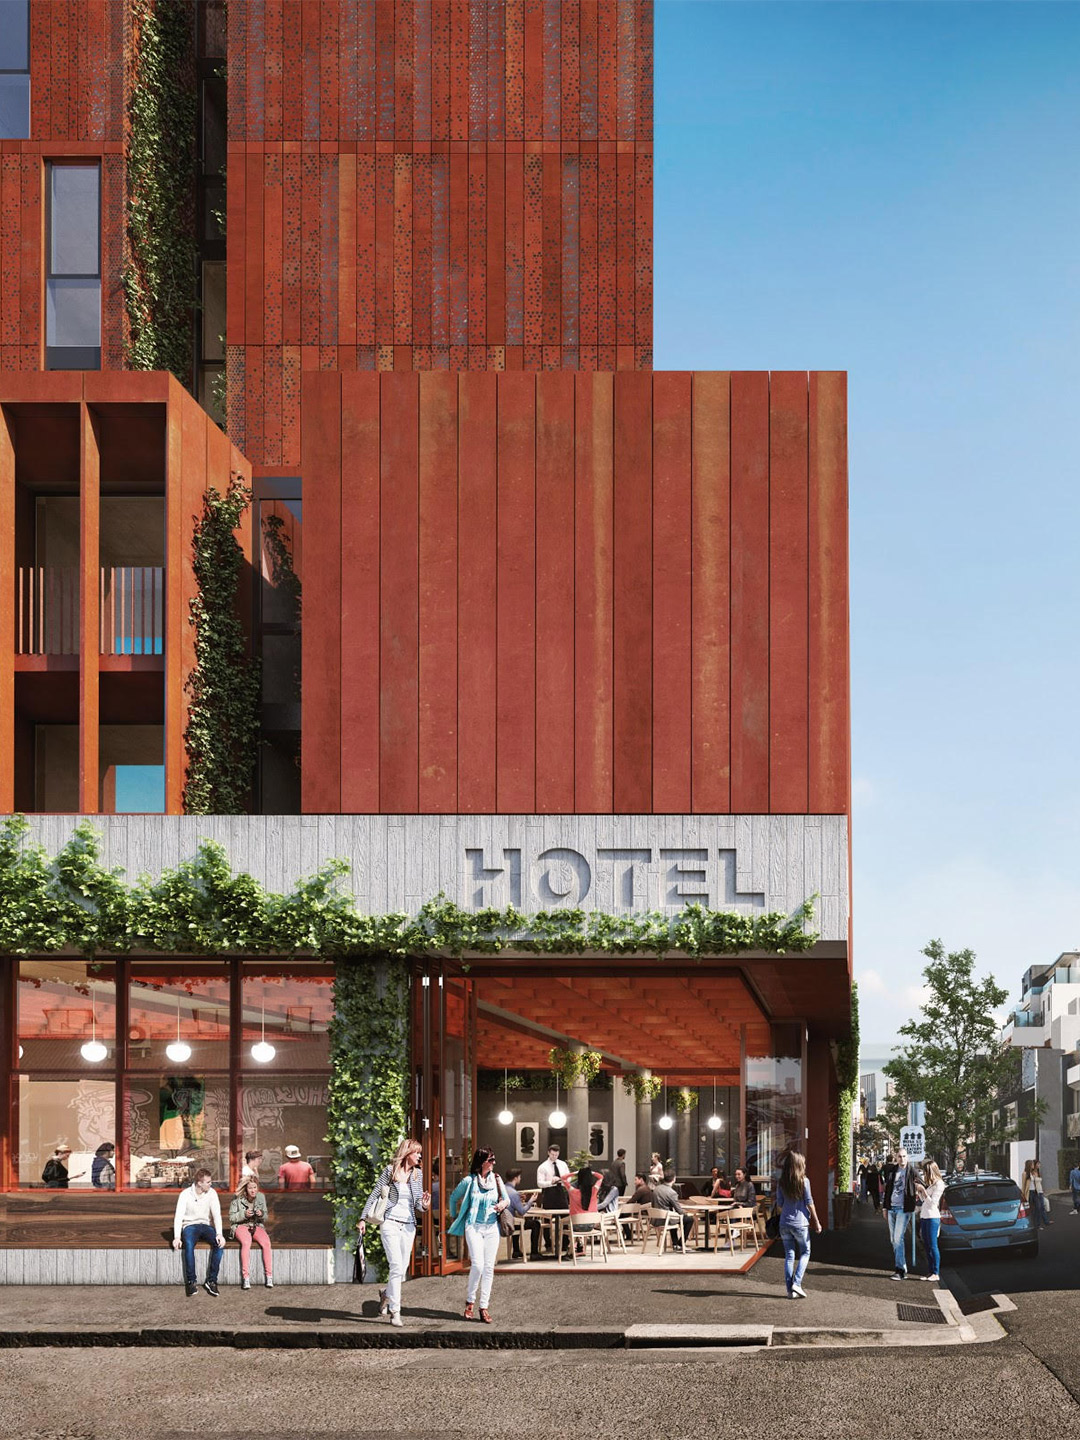 DAN | Daily Architecture News Fitzroy calling: The Standard Hotels to open first Australian boutique in Melbourne - DAN | Daily Architecture News